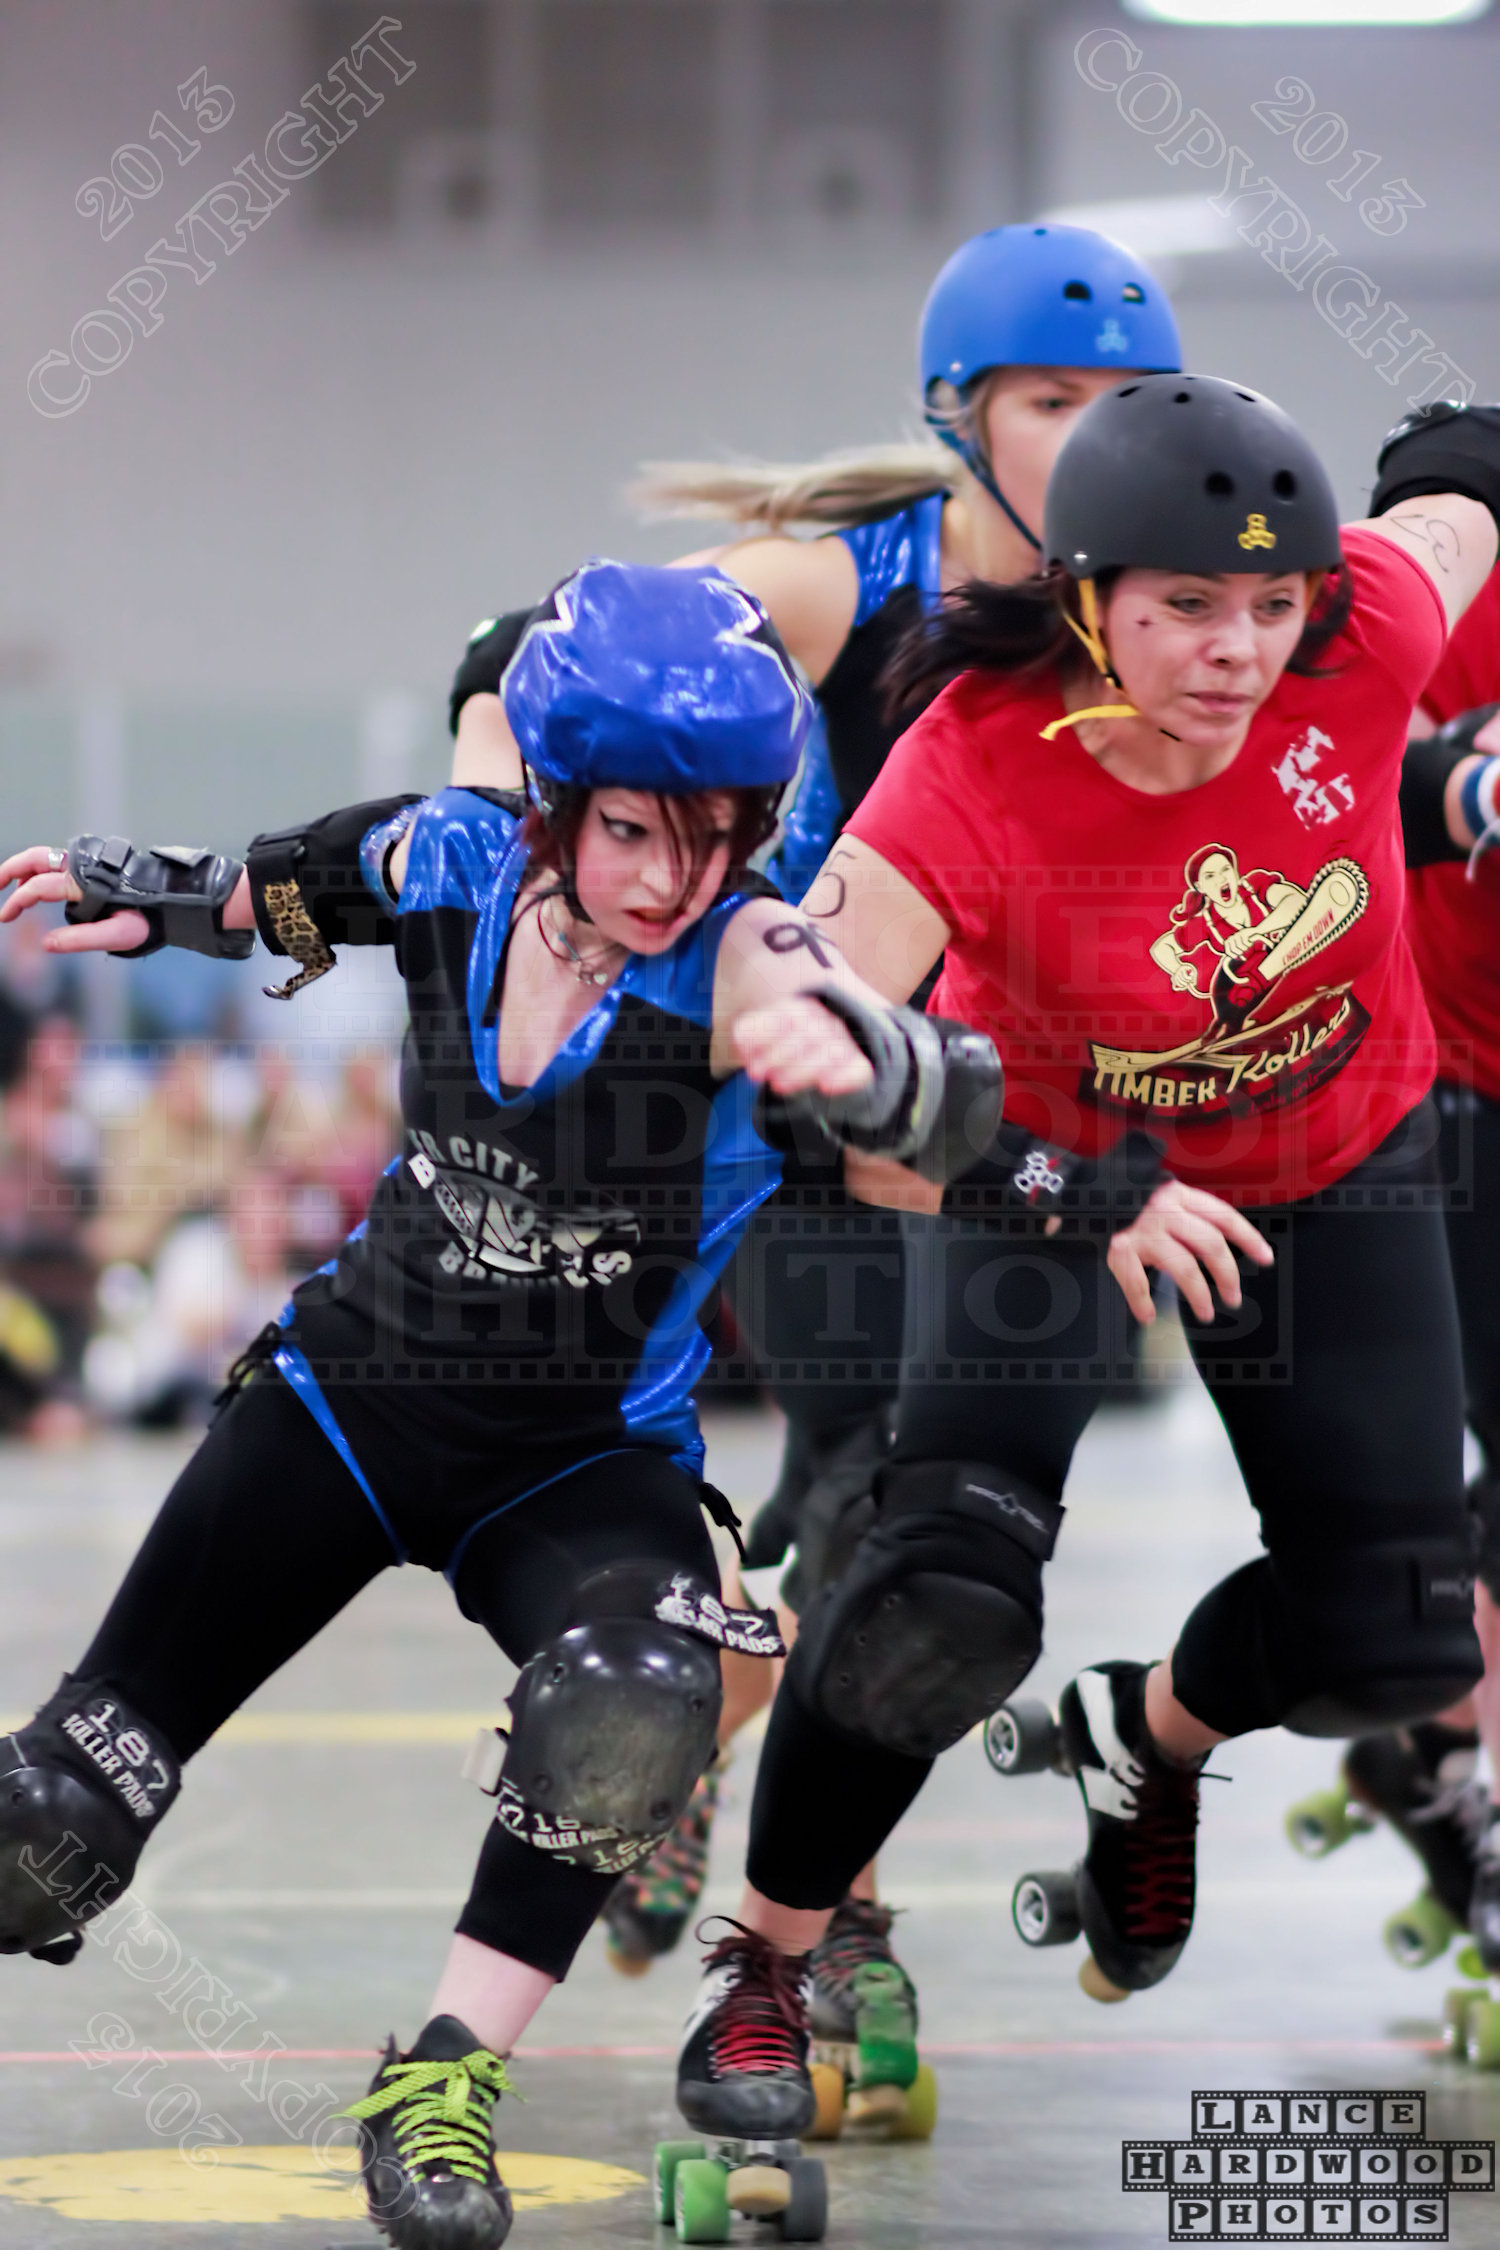 BCB Brawlers vrs FCDG Timber Rollers